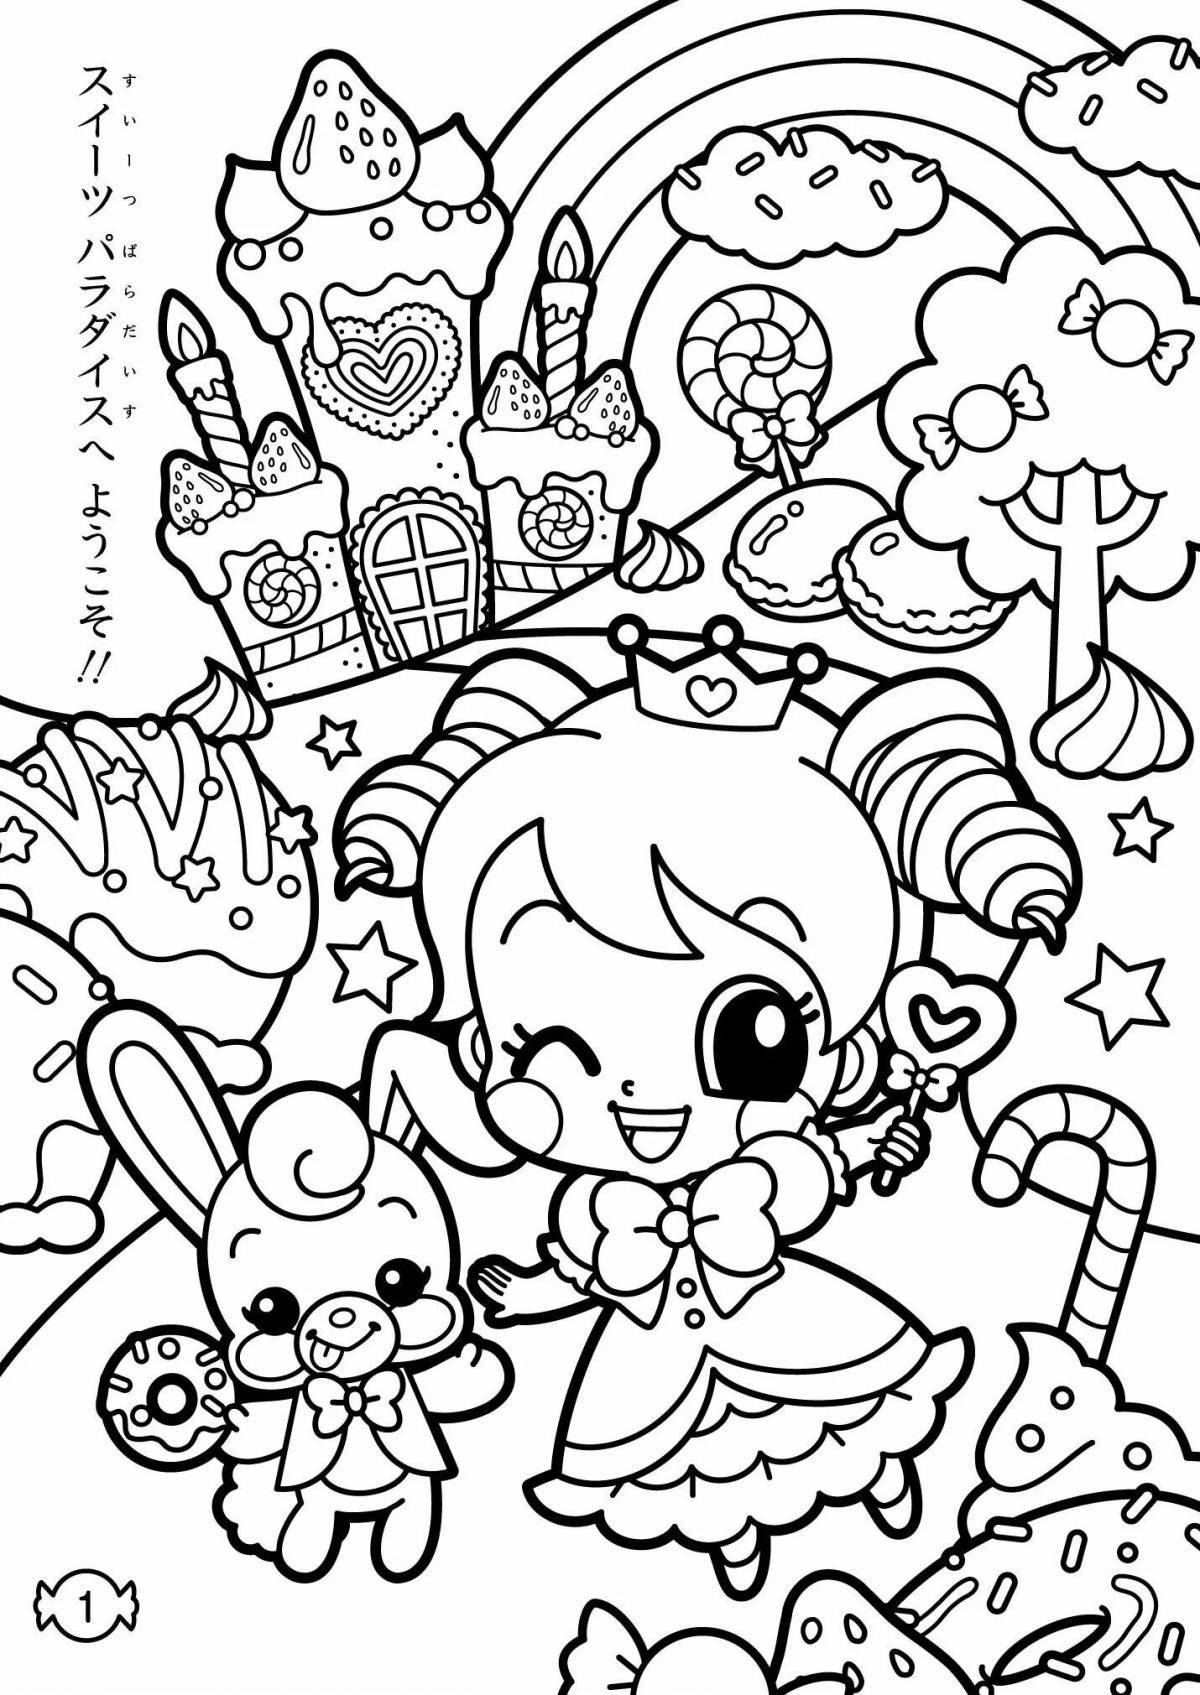 Coloring playful sweet world